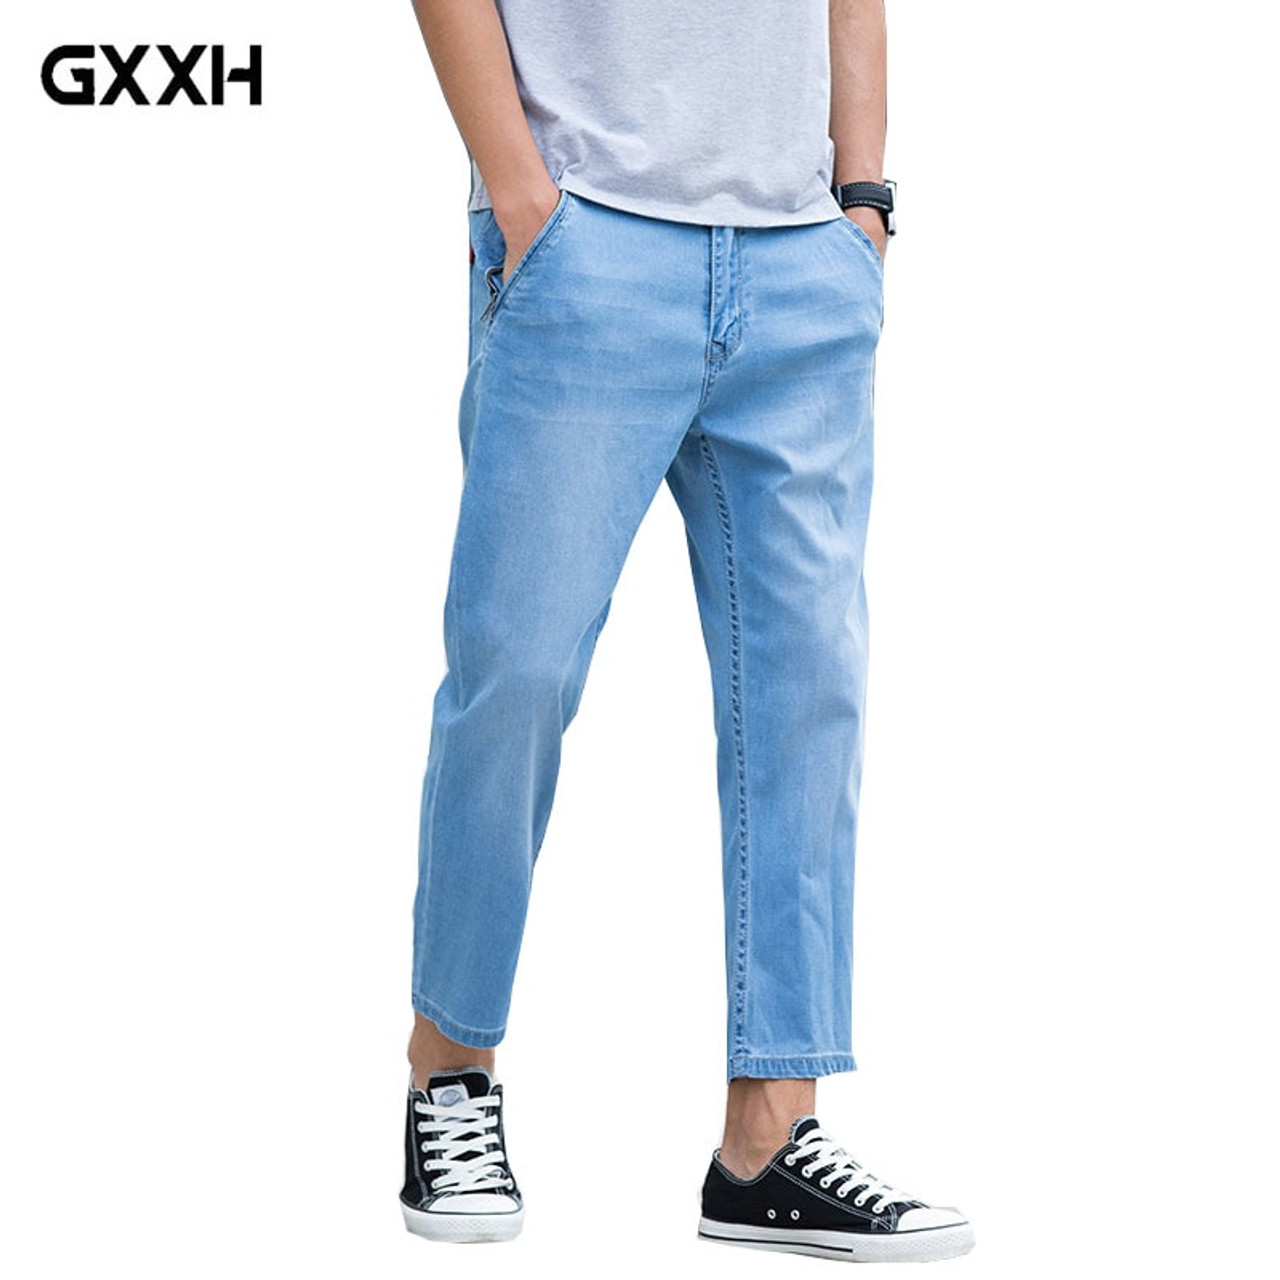 Men Jeans Summer Casual Stretch Slim Fit Ankle-Length Pants Fashion Korean  Style Thin Cotton Grey Denim Trousers - AliExpress